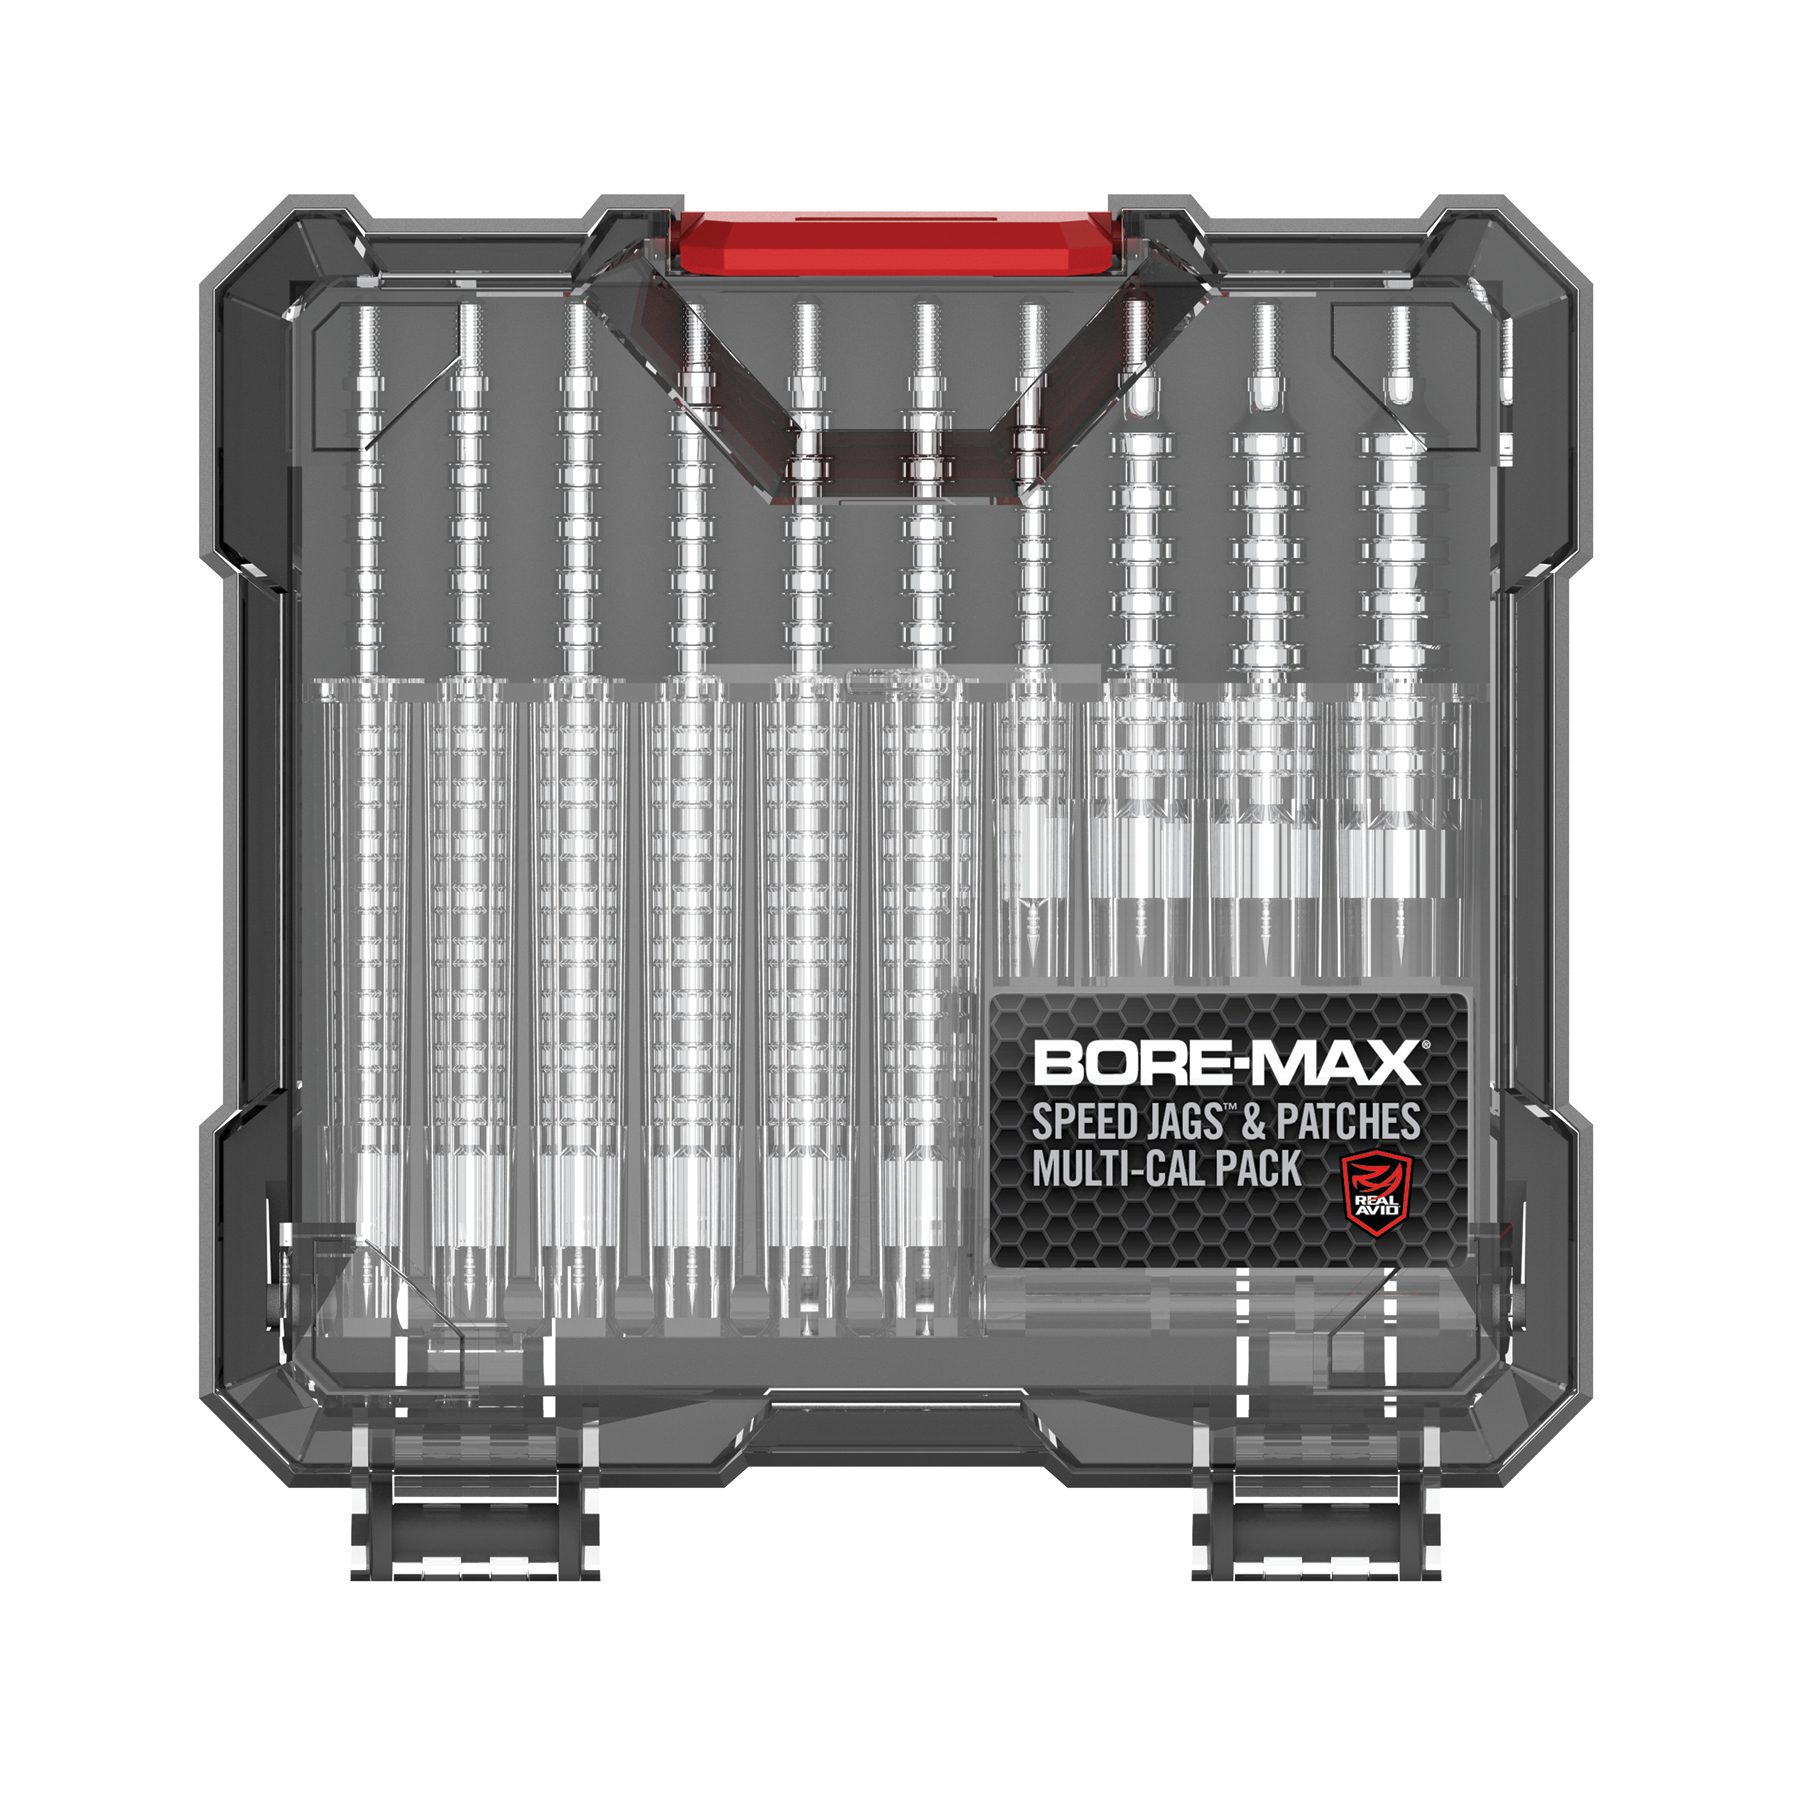 the core max drill set is packed in a plastic case